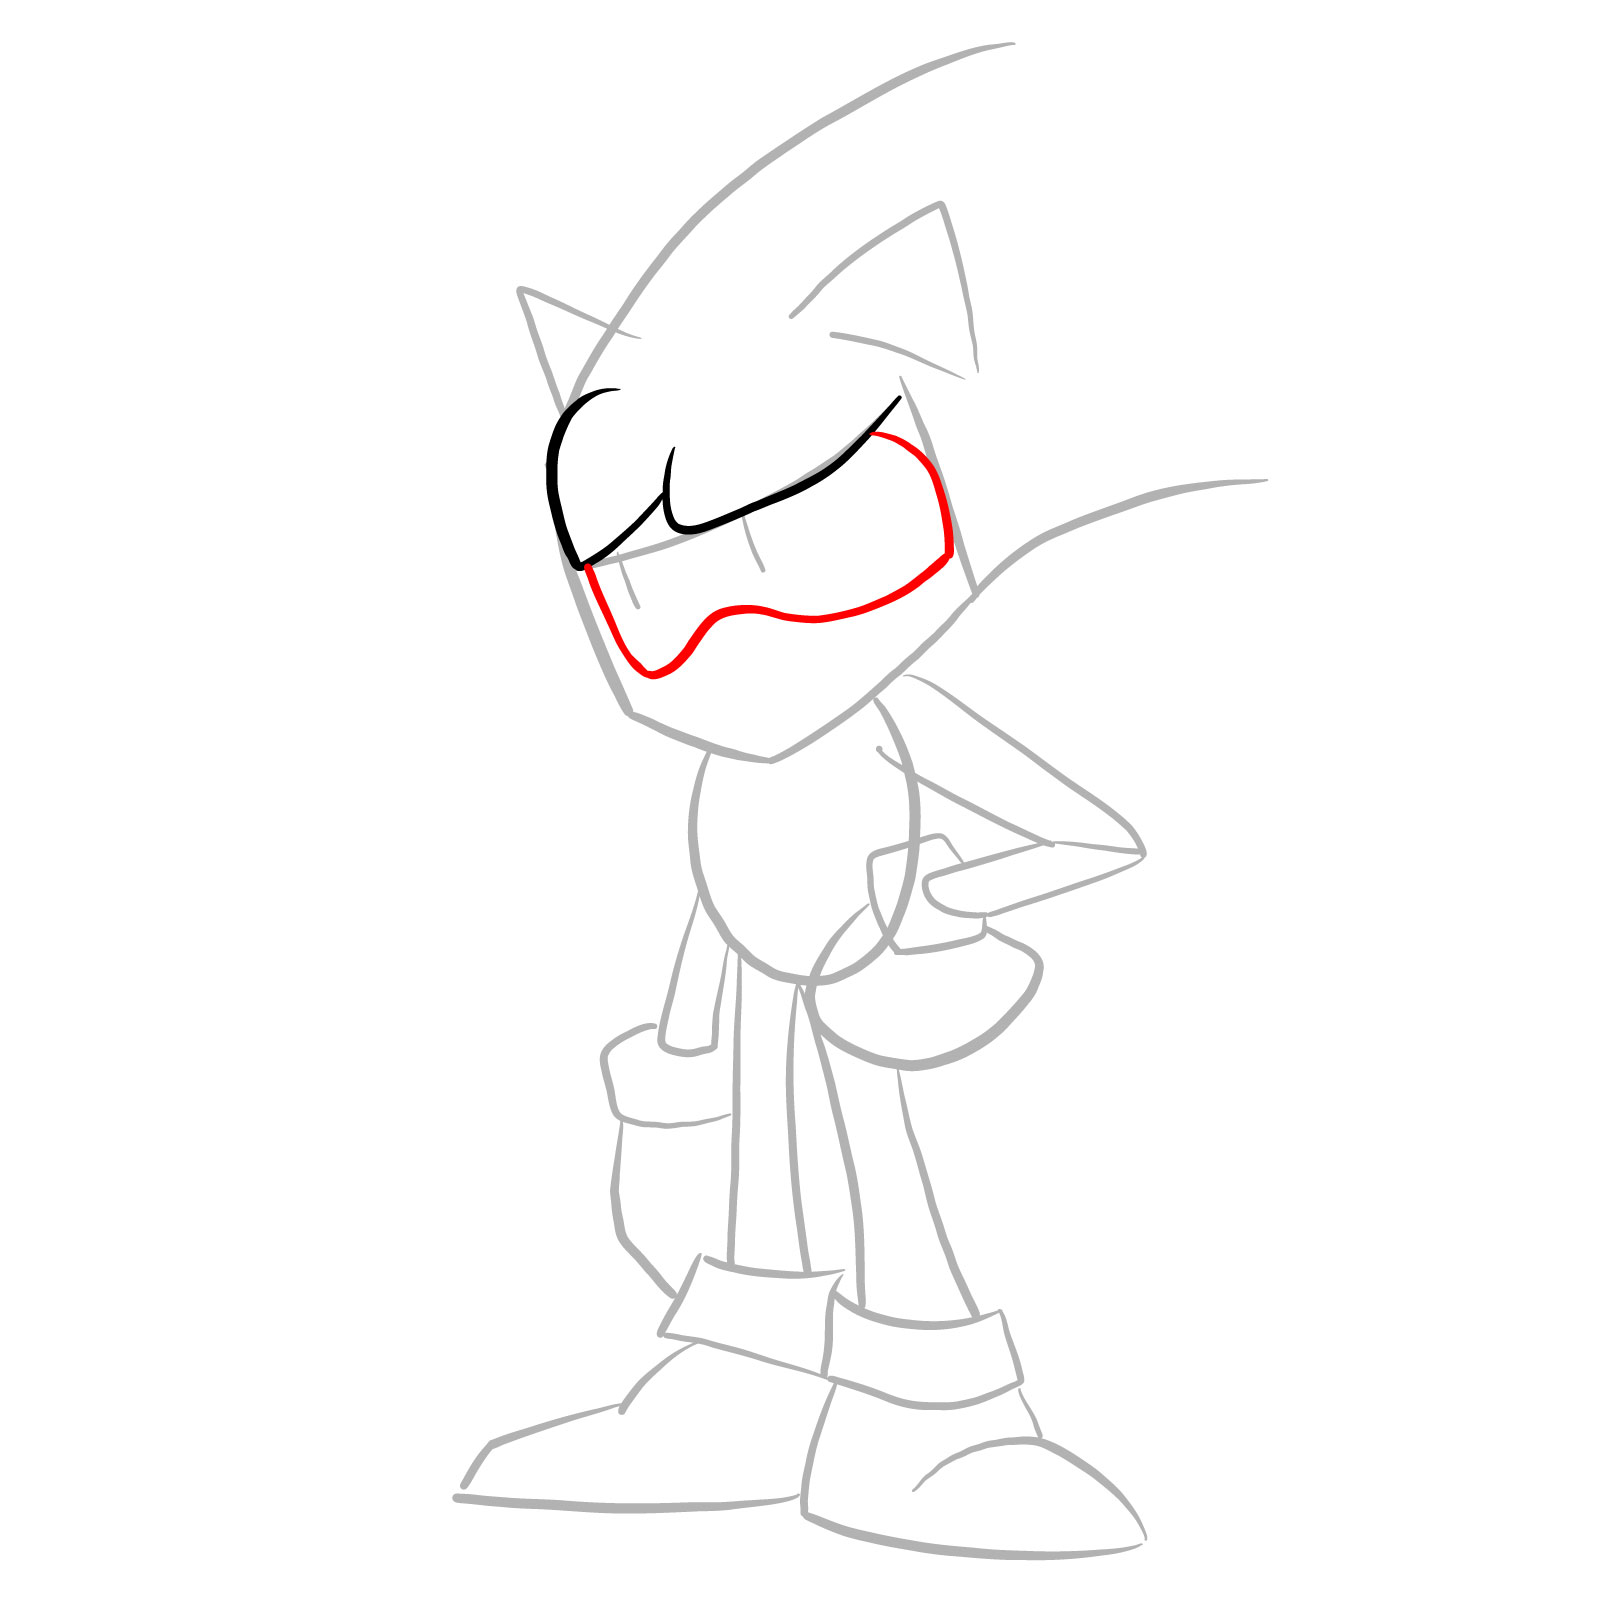 How to draw Sonic - FNF: Secret Histories - step 05